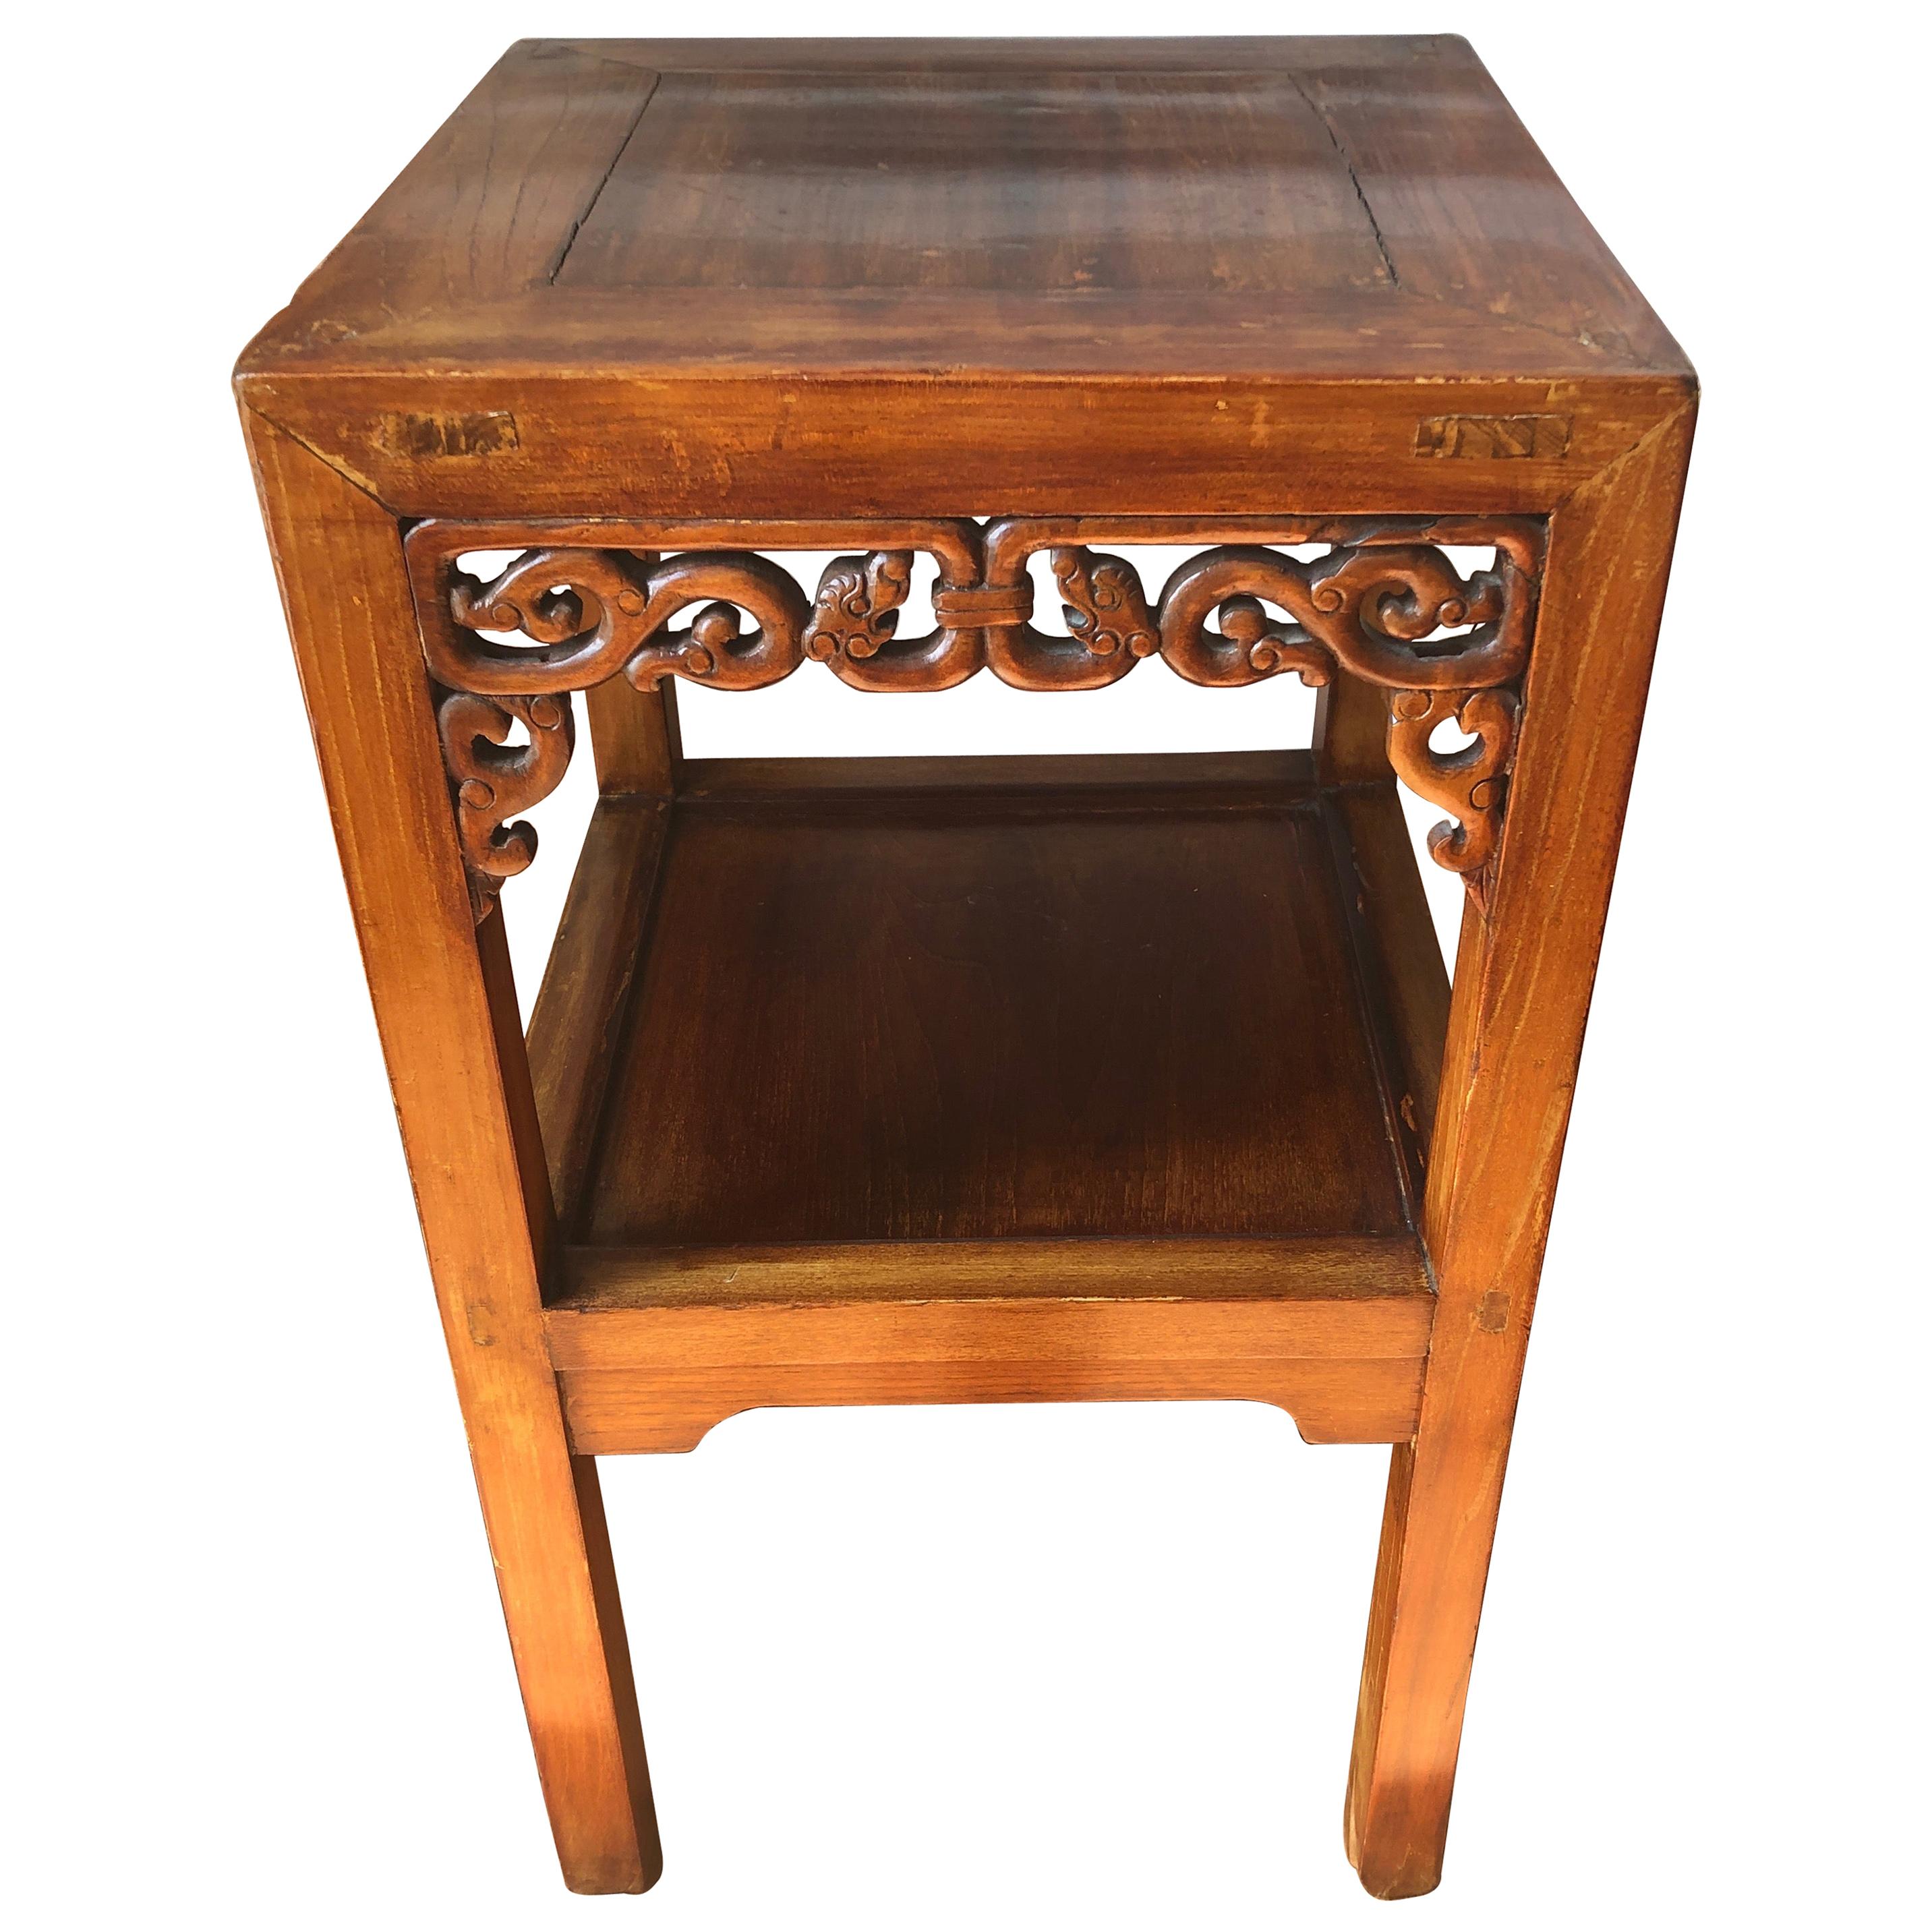 Marvellous Elm Chinese Two-Tier Side Table or Nightstand